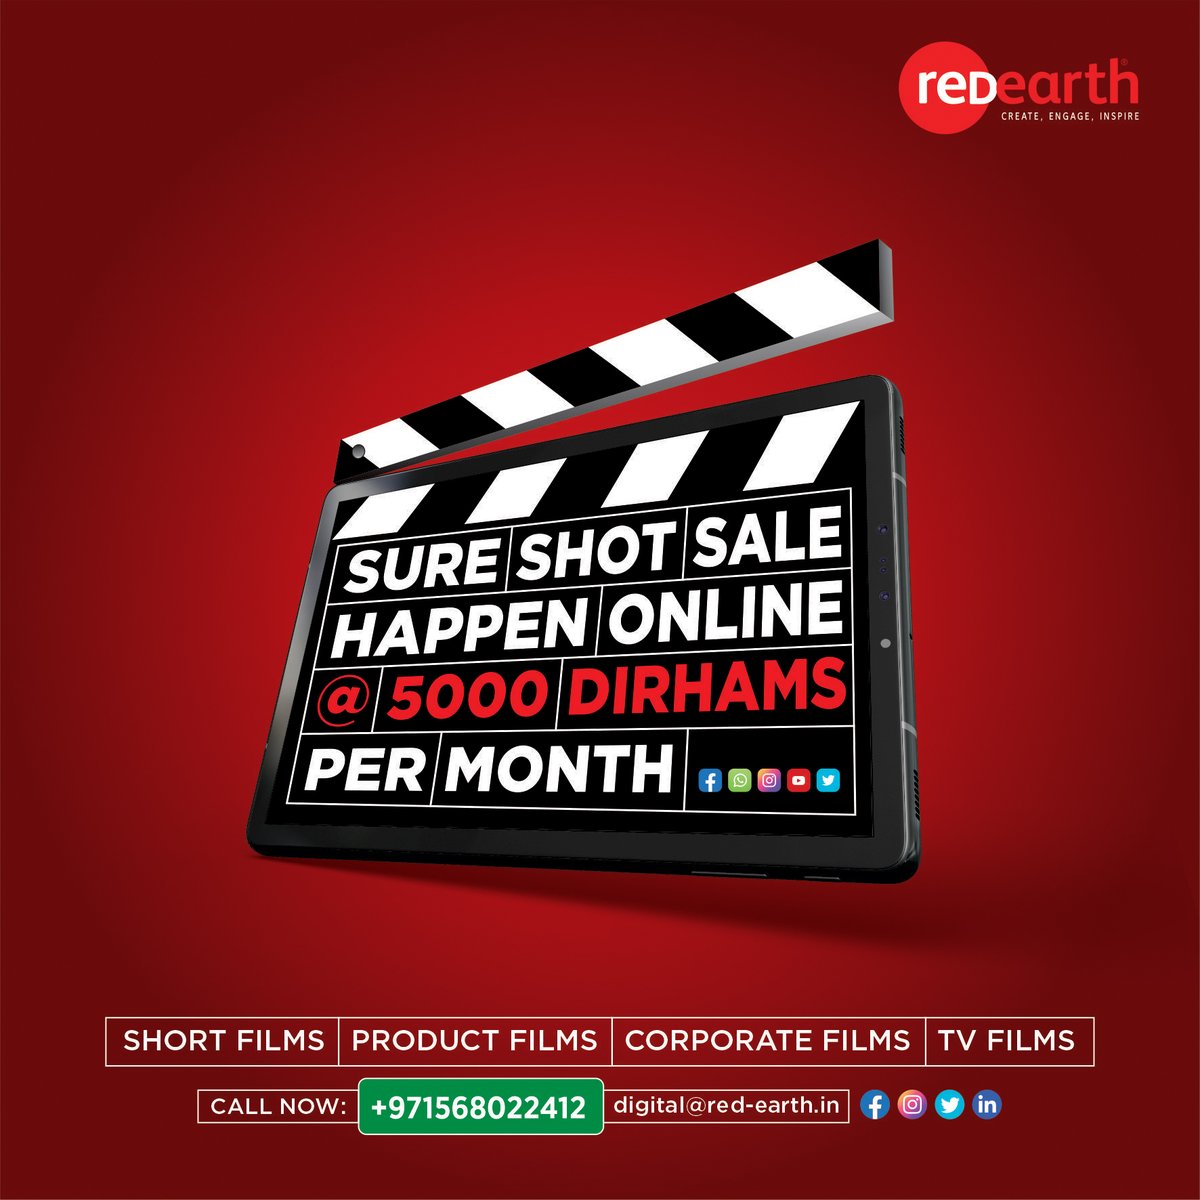 Innovative Filmmaking for Your Brand!
Unleash Your Brand's Potential with Our Expertise!
Short Films | Product Films | Corporate Films | TV Films
CALL NOW: +971568022412

#Redearth #redearthdubai #corporatefilms #productfilms #adfilms #TVC #shortfilms #Adagency #ad #AdAgencyDubai